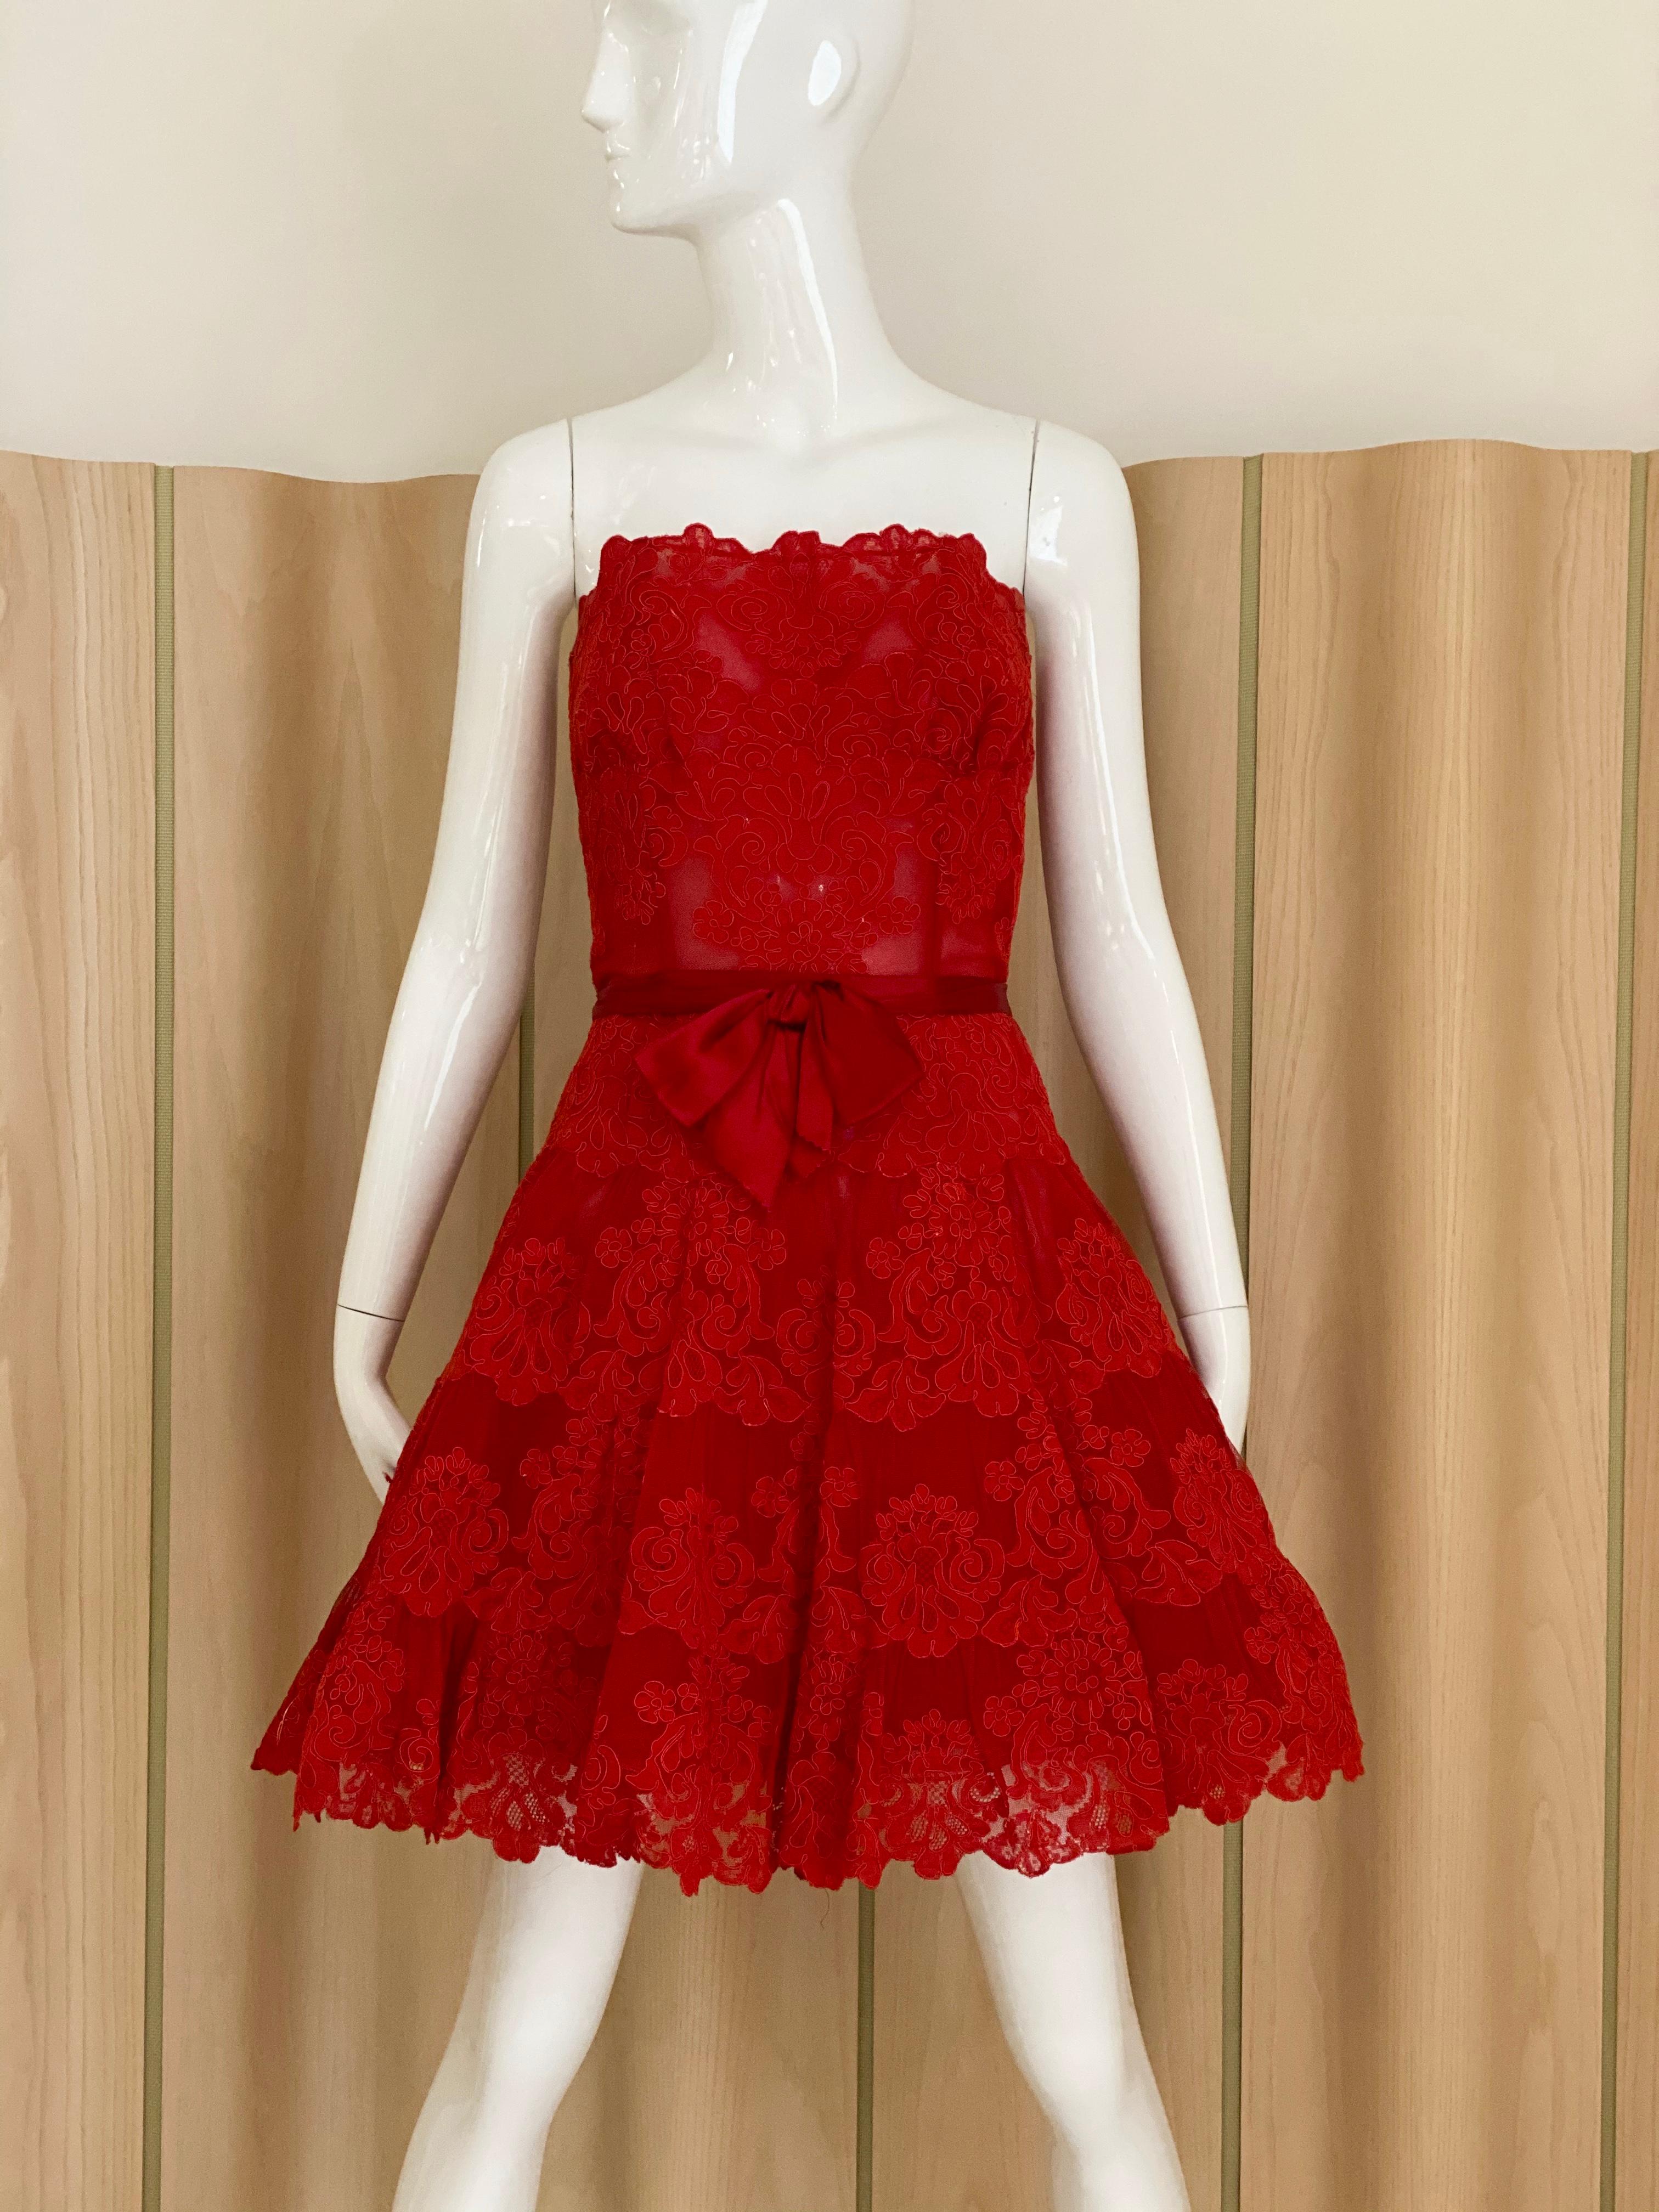 80s Vicky Tiel Couture red lace strapless mini cocktail dress.
Size: 4
Bust: 32